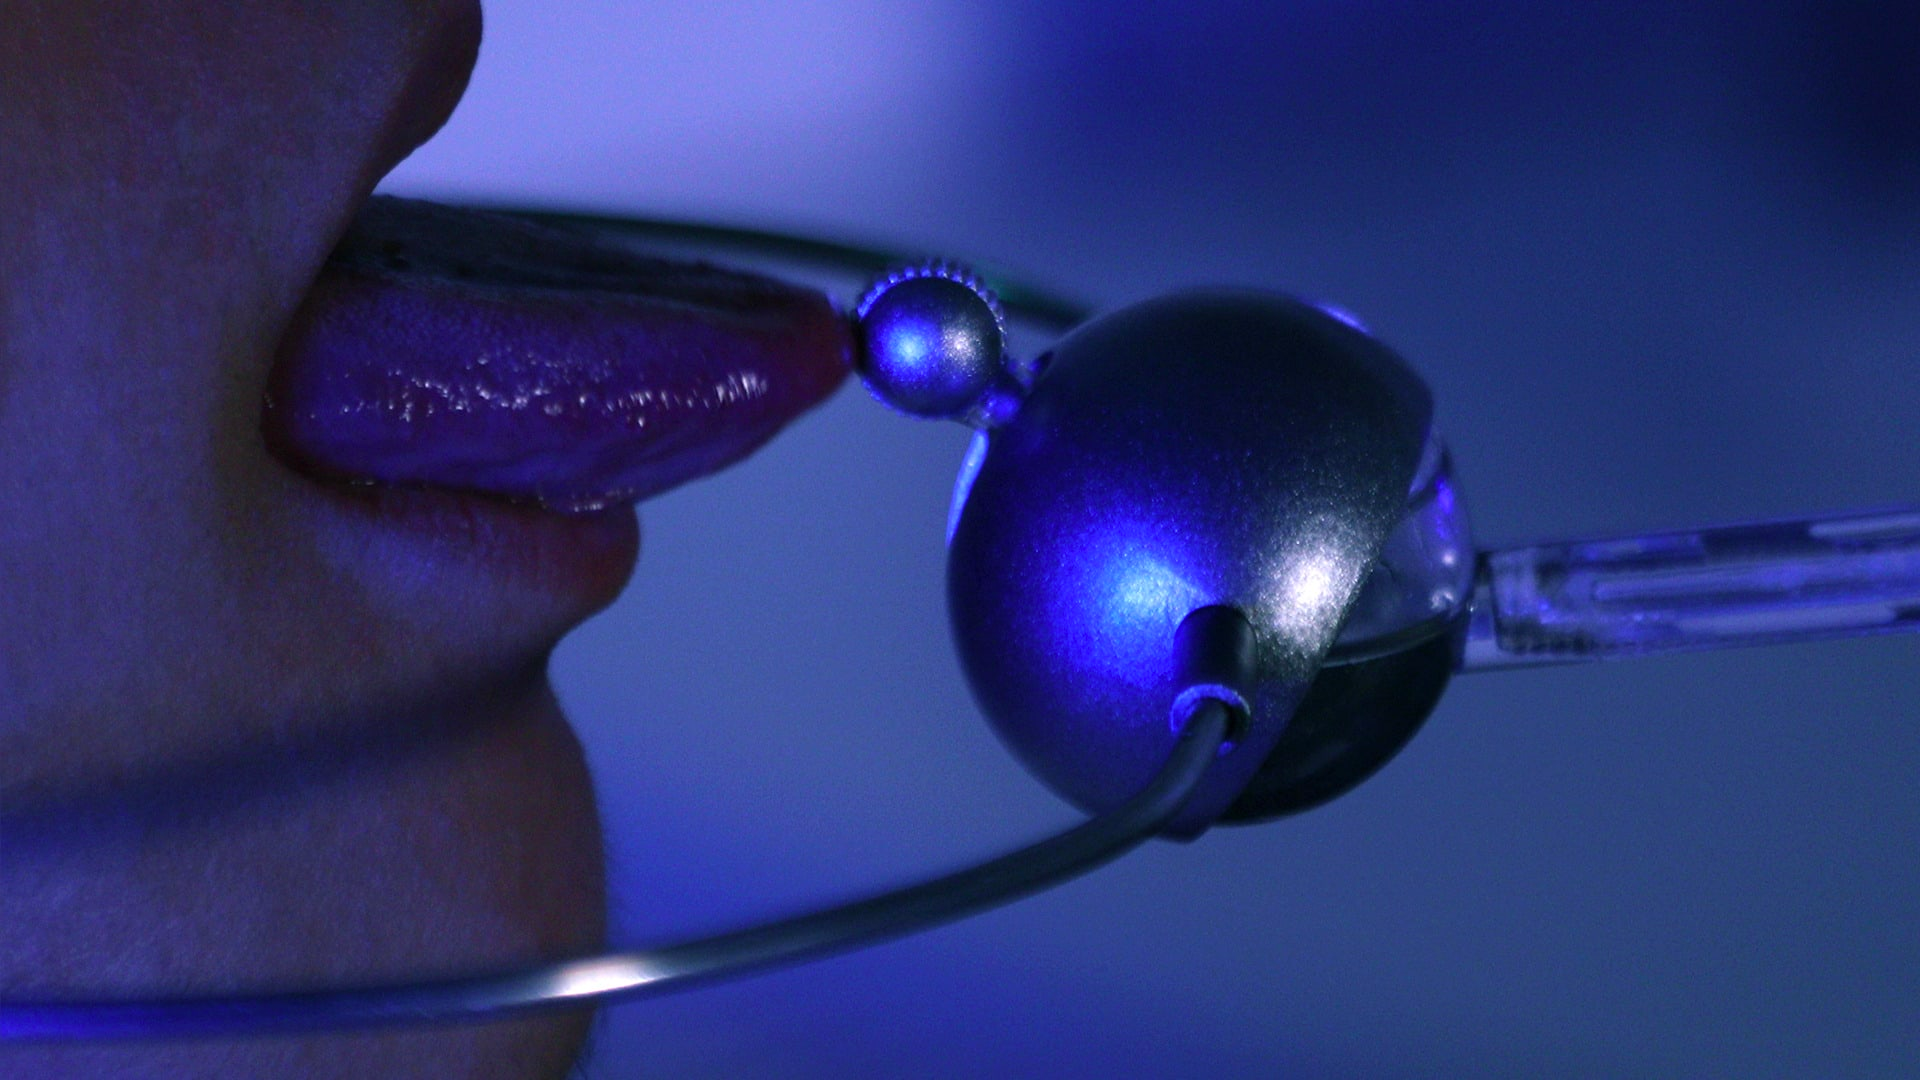 A blue-tinted photograph of a close-up mouth in profile, with the tongue protruding and its tip touching a small metal ball attached to some sort of device which includes a larger spherical object.